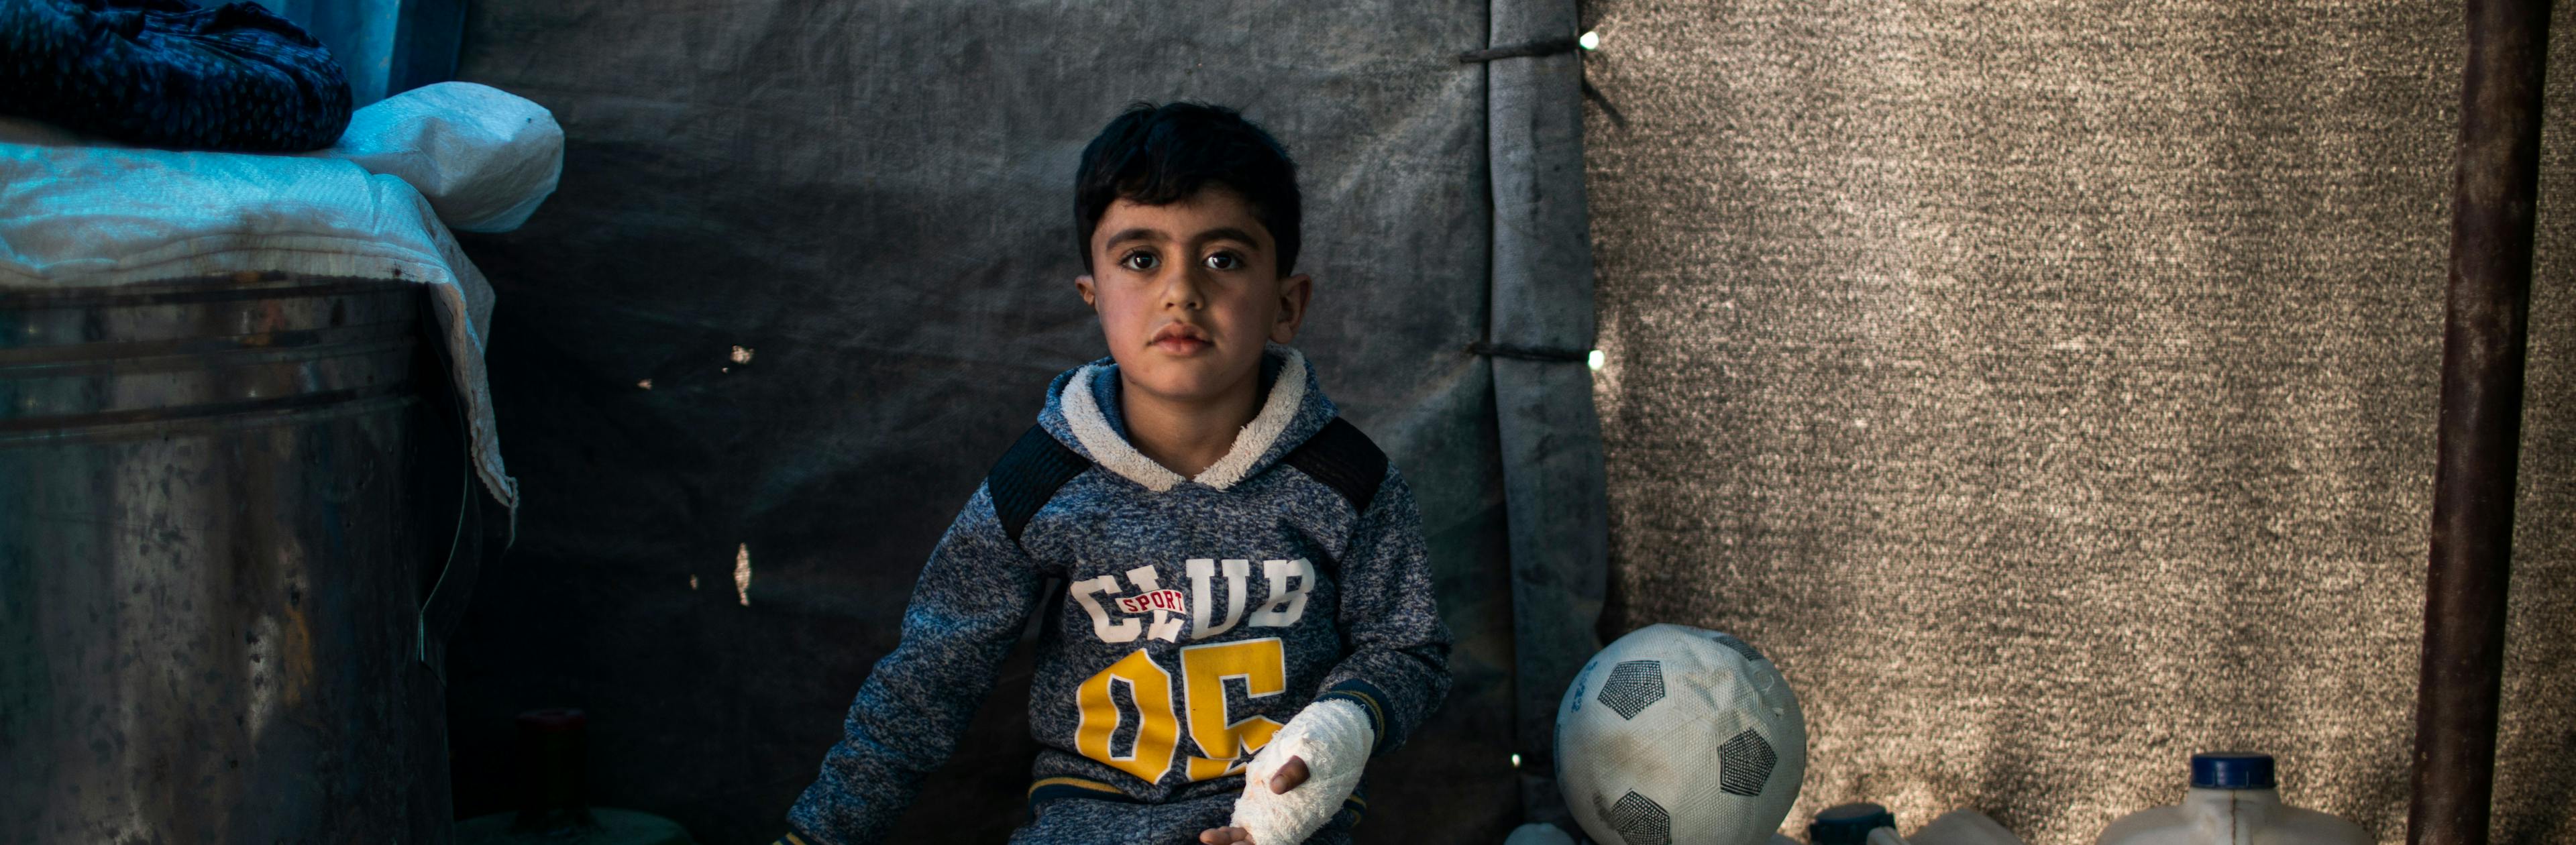 On 28 February 2022 in Iraq, 5-year-old Hussein sits on a water container at his temporary home in Habaniya, on the outskirts of Fallujah. In November 2021, Hussein was playing soccer with his brother when a piece of previously unexploded ordinance (UXO) detonated  under him, ripping open his stomach and leaving part of his right ear missing. 